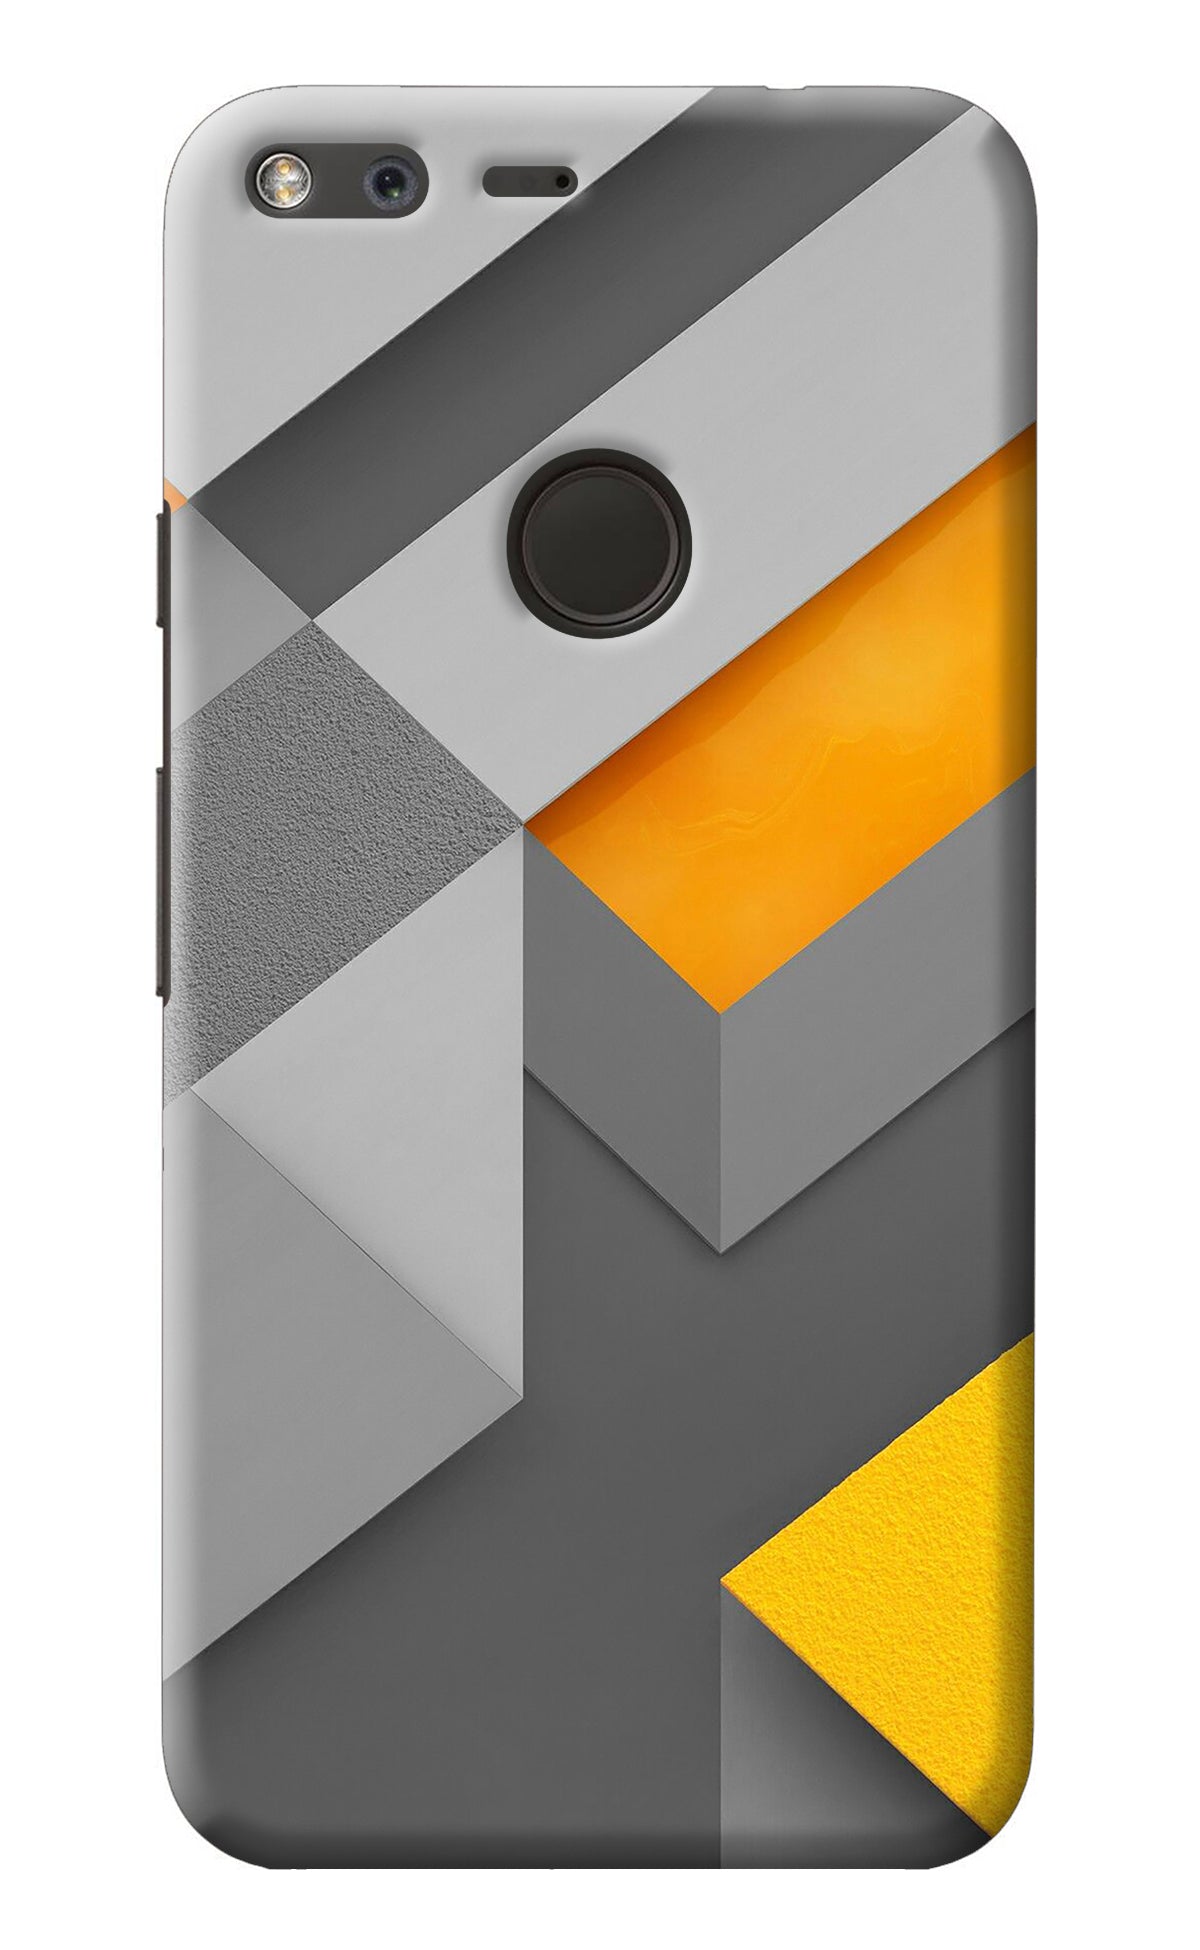 Abstract Google Pixel XL Back Cover